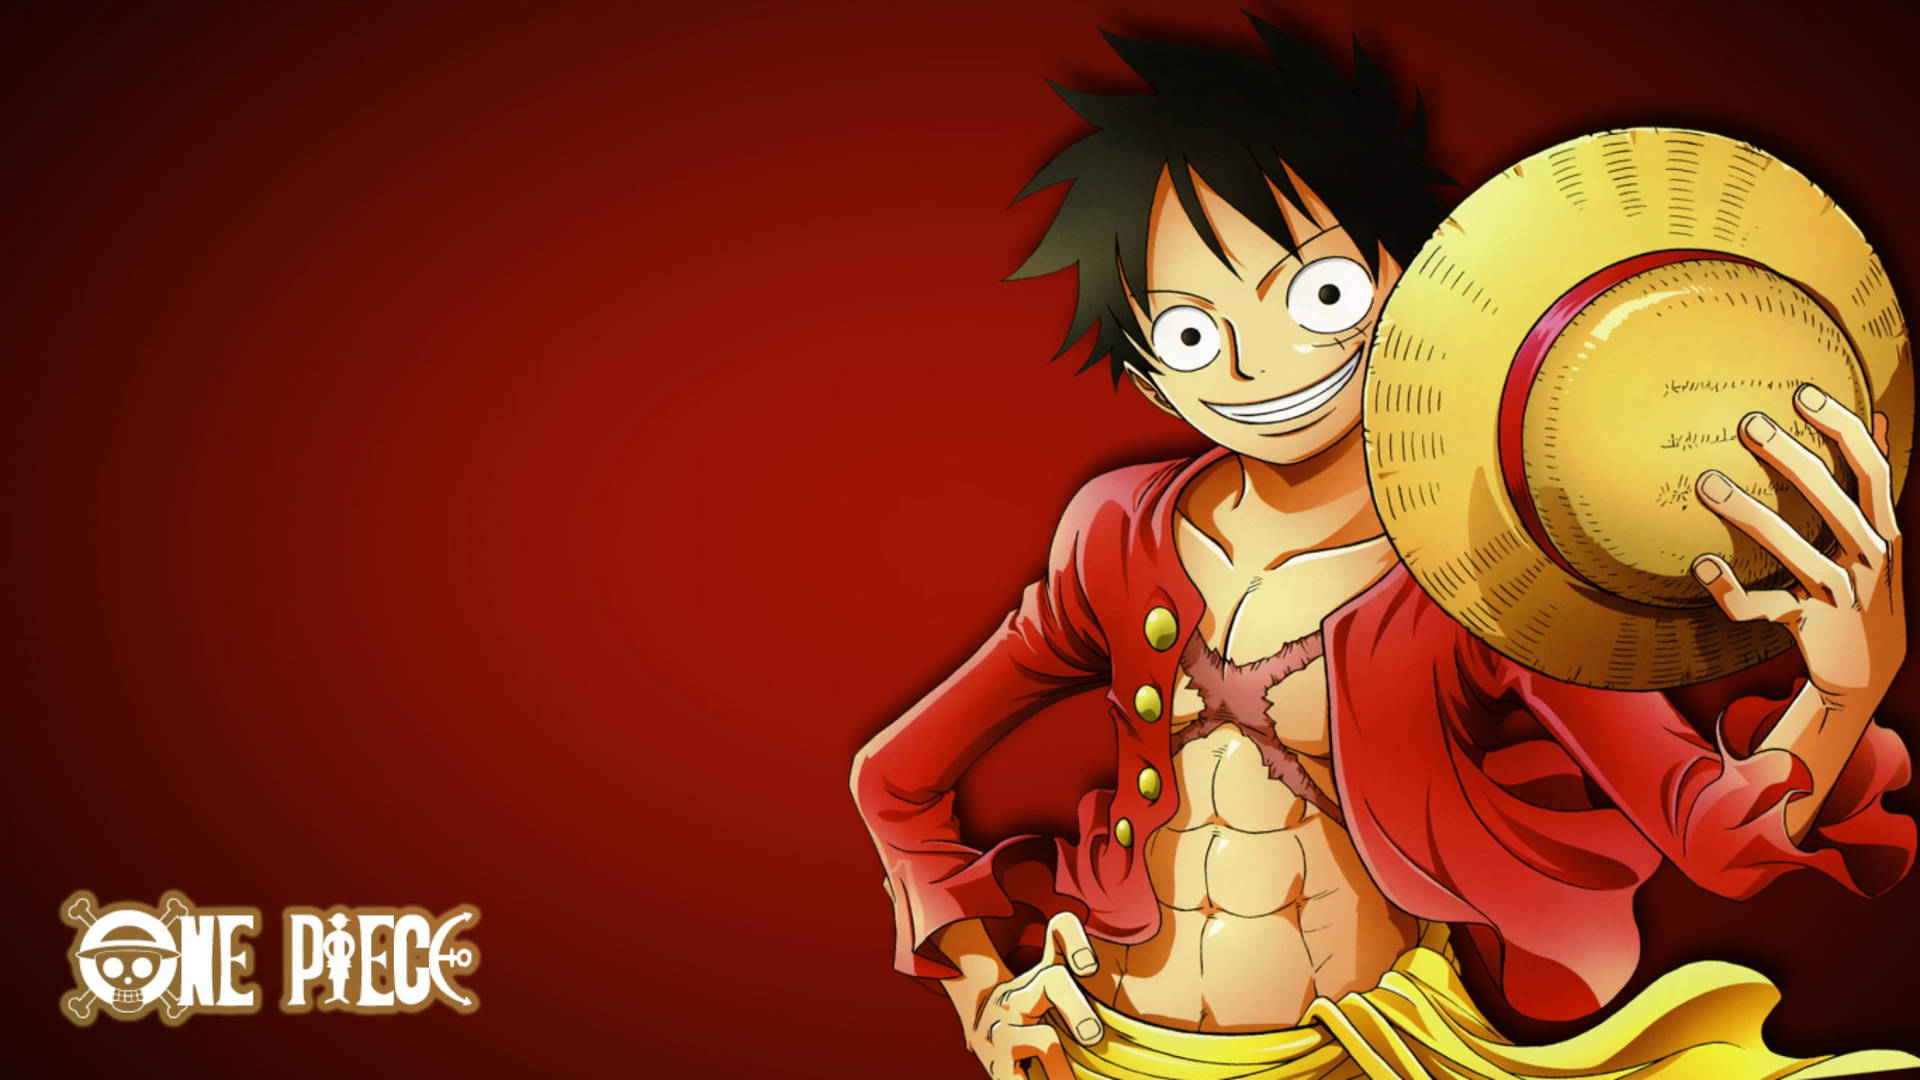 One Piece Monkey D Luffy Poster Background